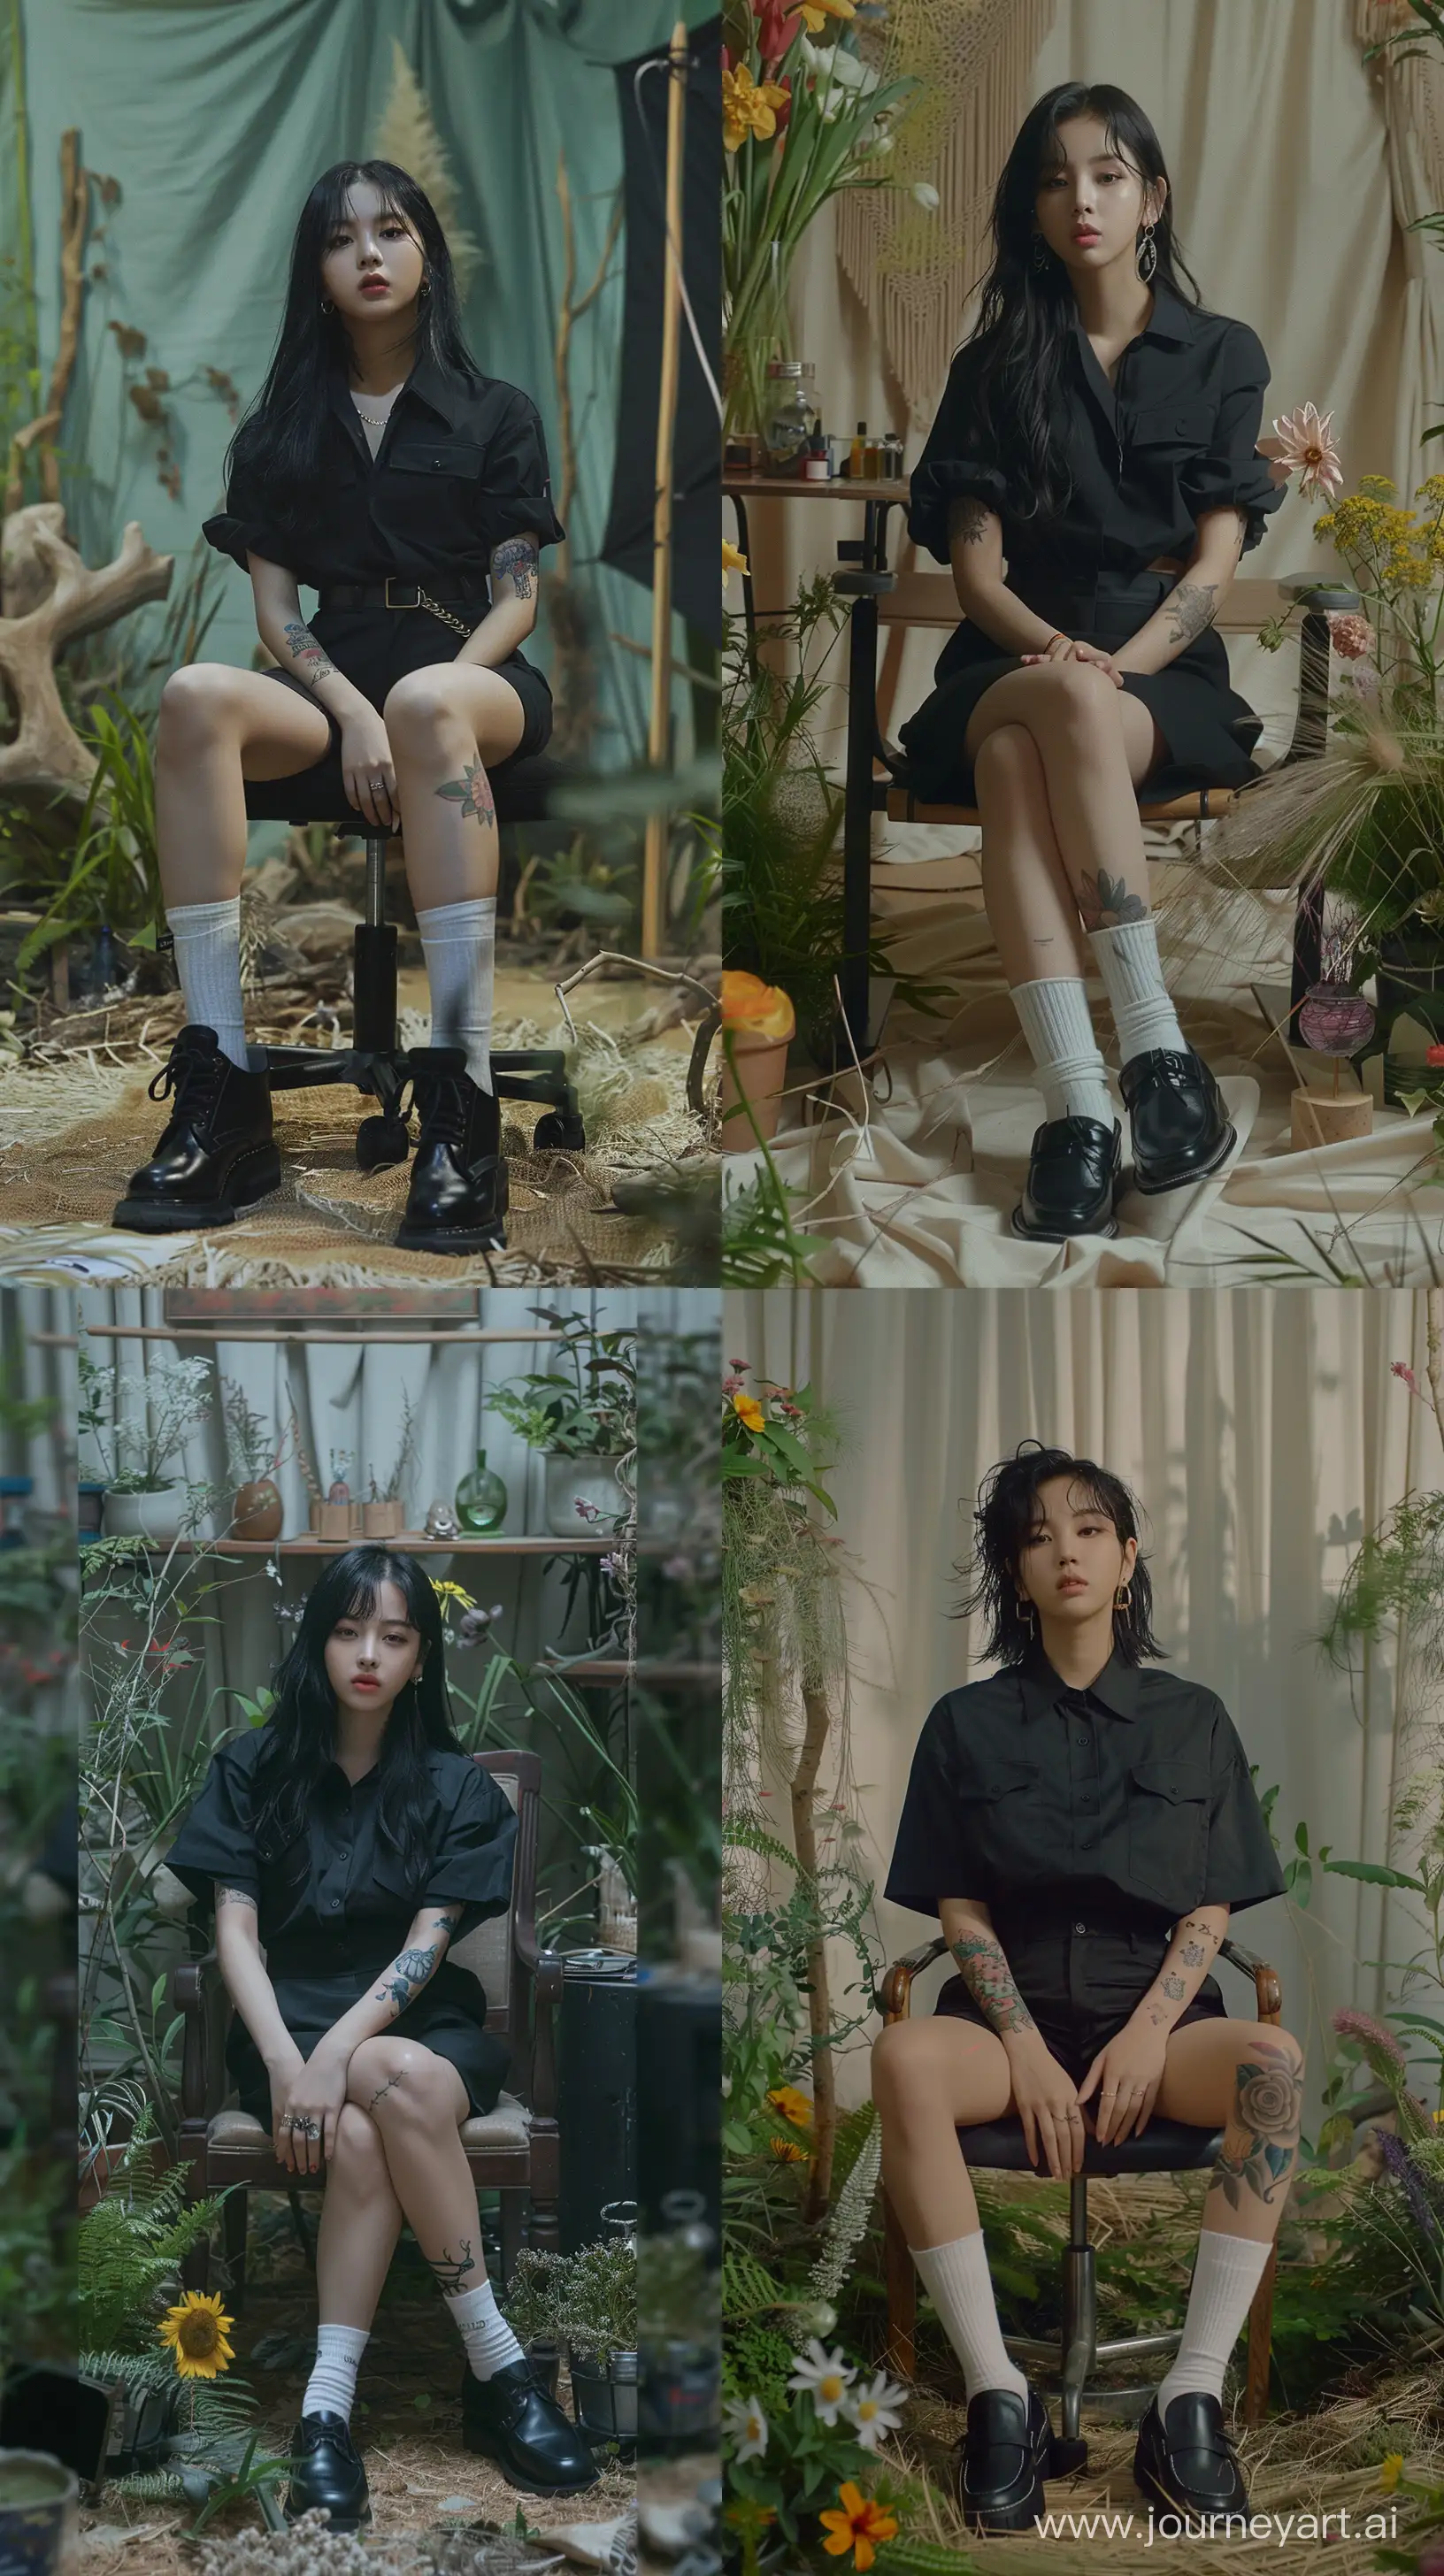 Blackpinks-Jennie-Sitting-in-Nature-Studio-Set-with-Chic-Black-Attire-and-Bare-Face